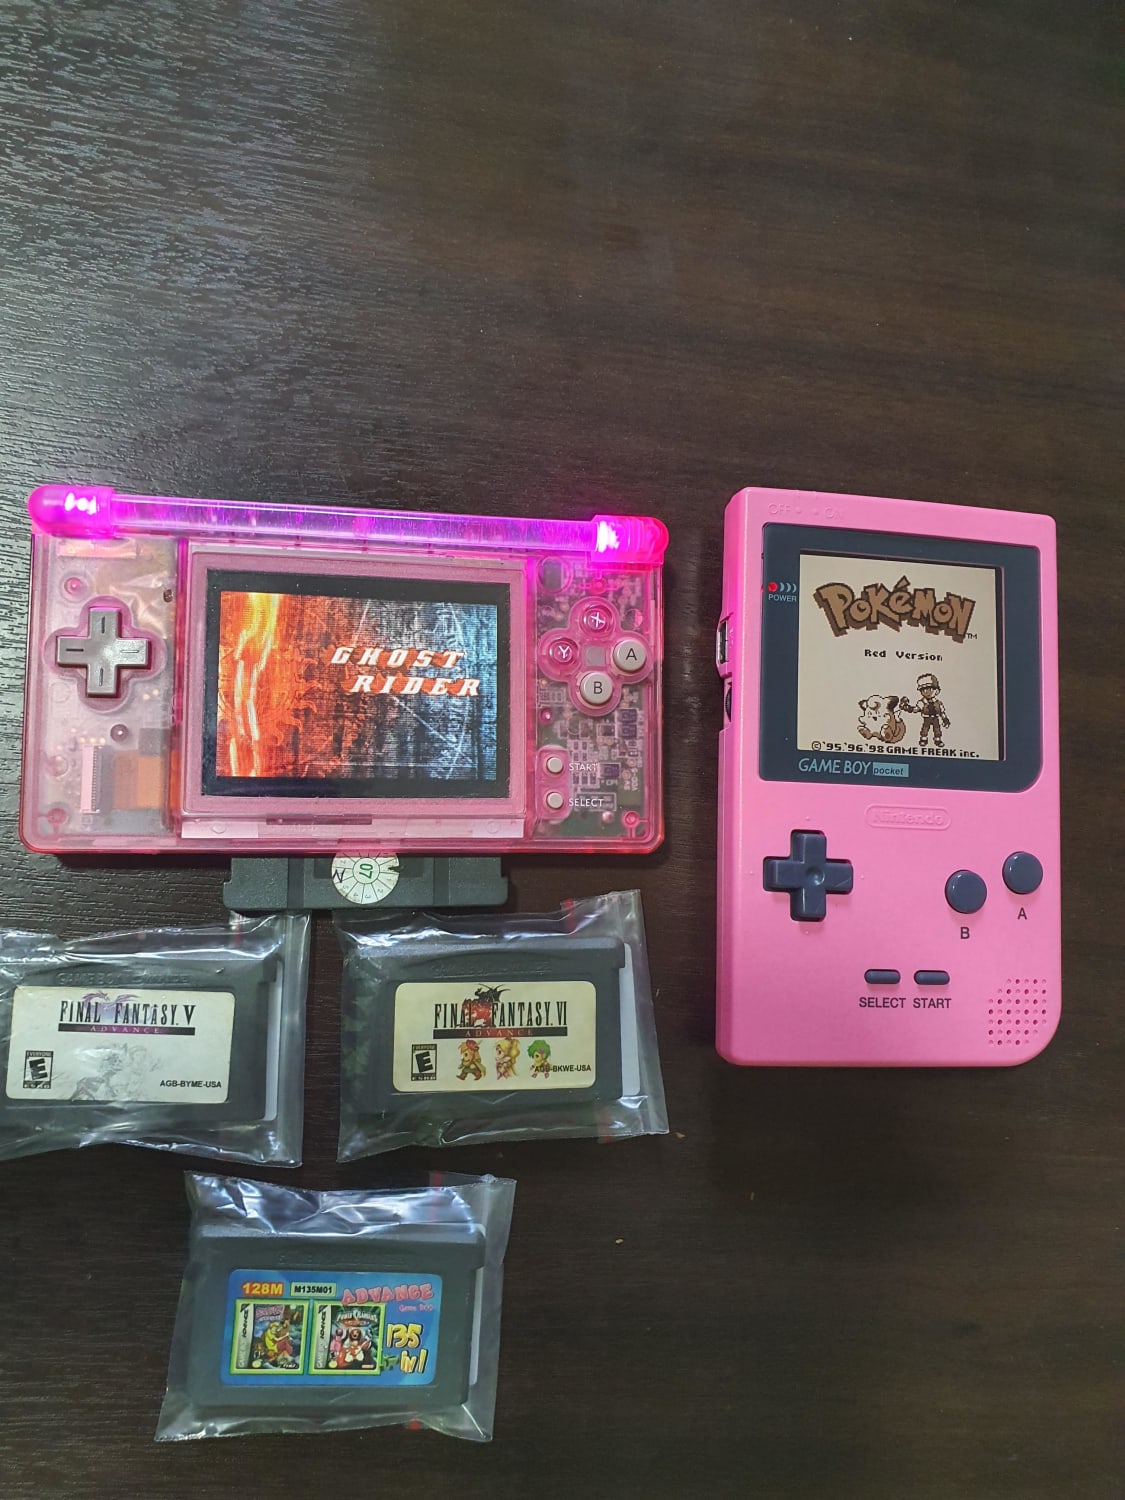 Found these gameboy n gameboy advance cartidge in my local secondhand shop. Remind me of my childhood n couldnt resist n bought them. Spend the weekend playing with them, ghost rider is such a good game (love the movie too).